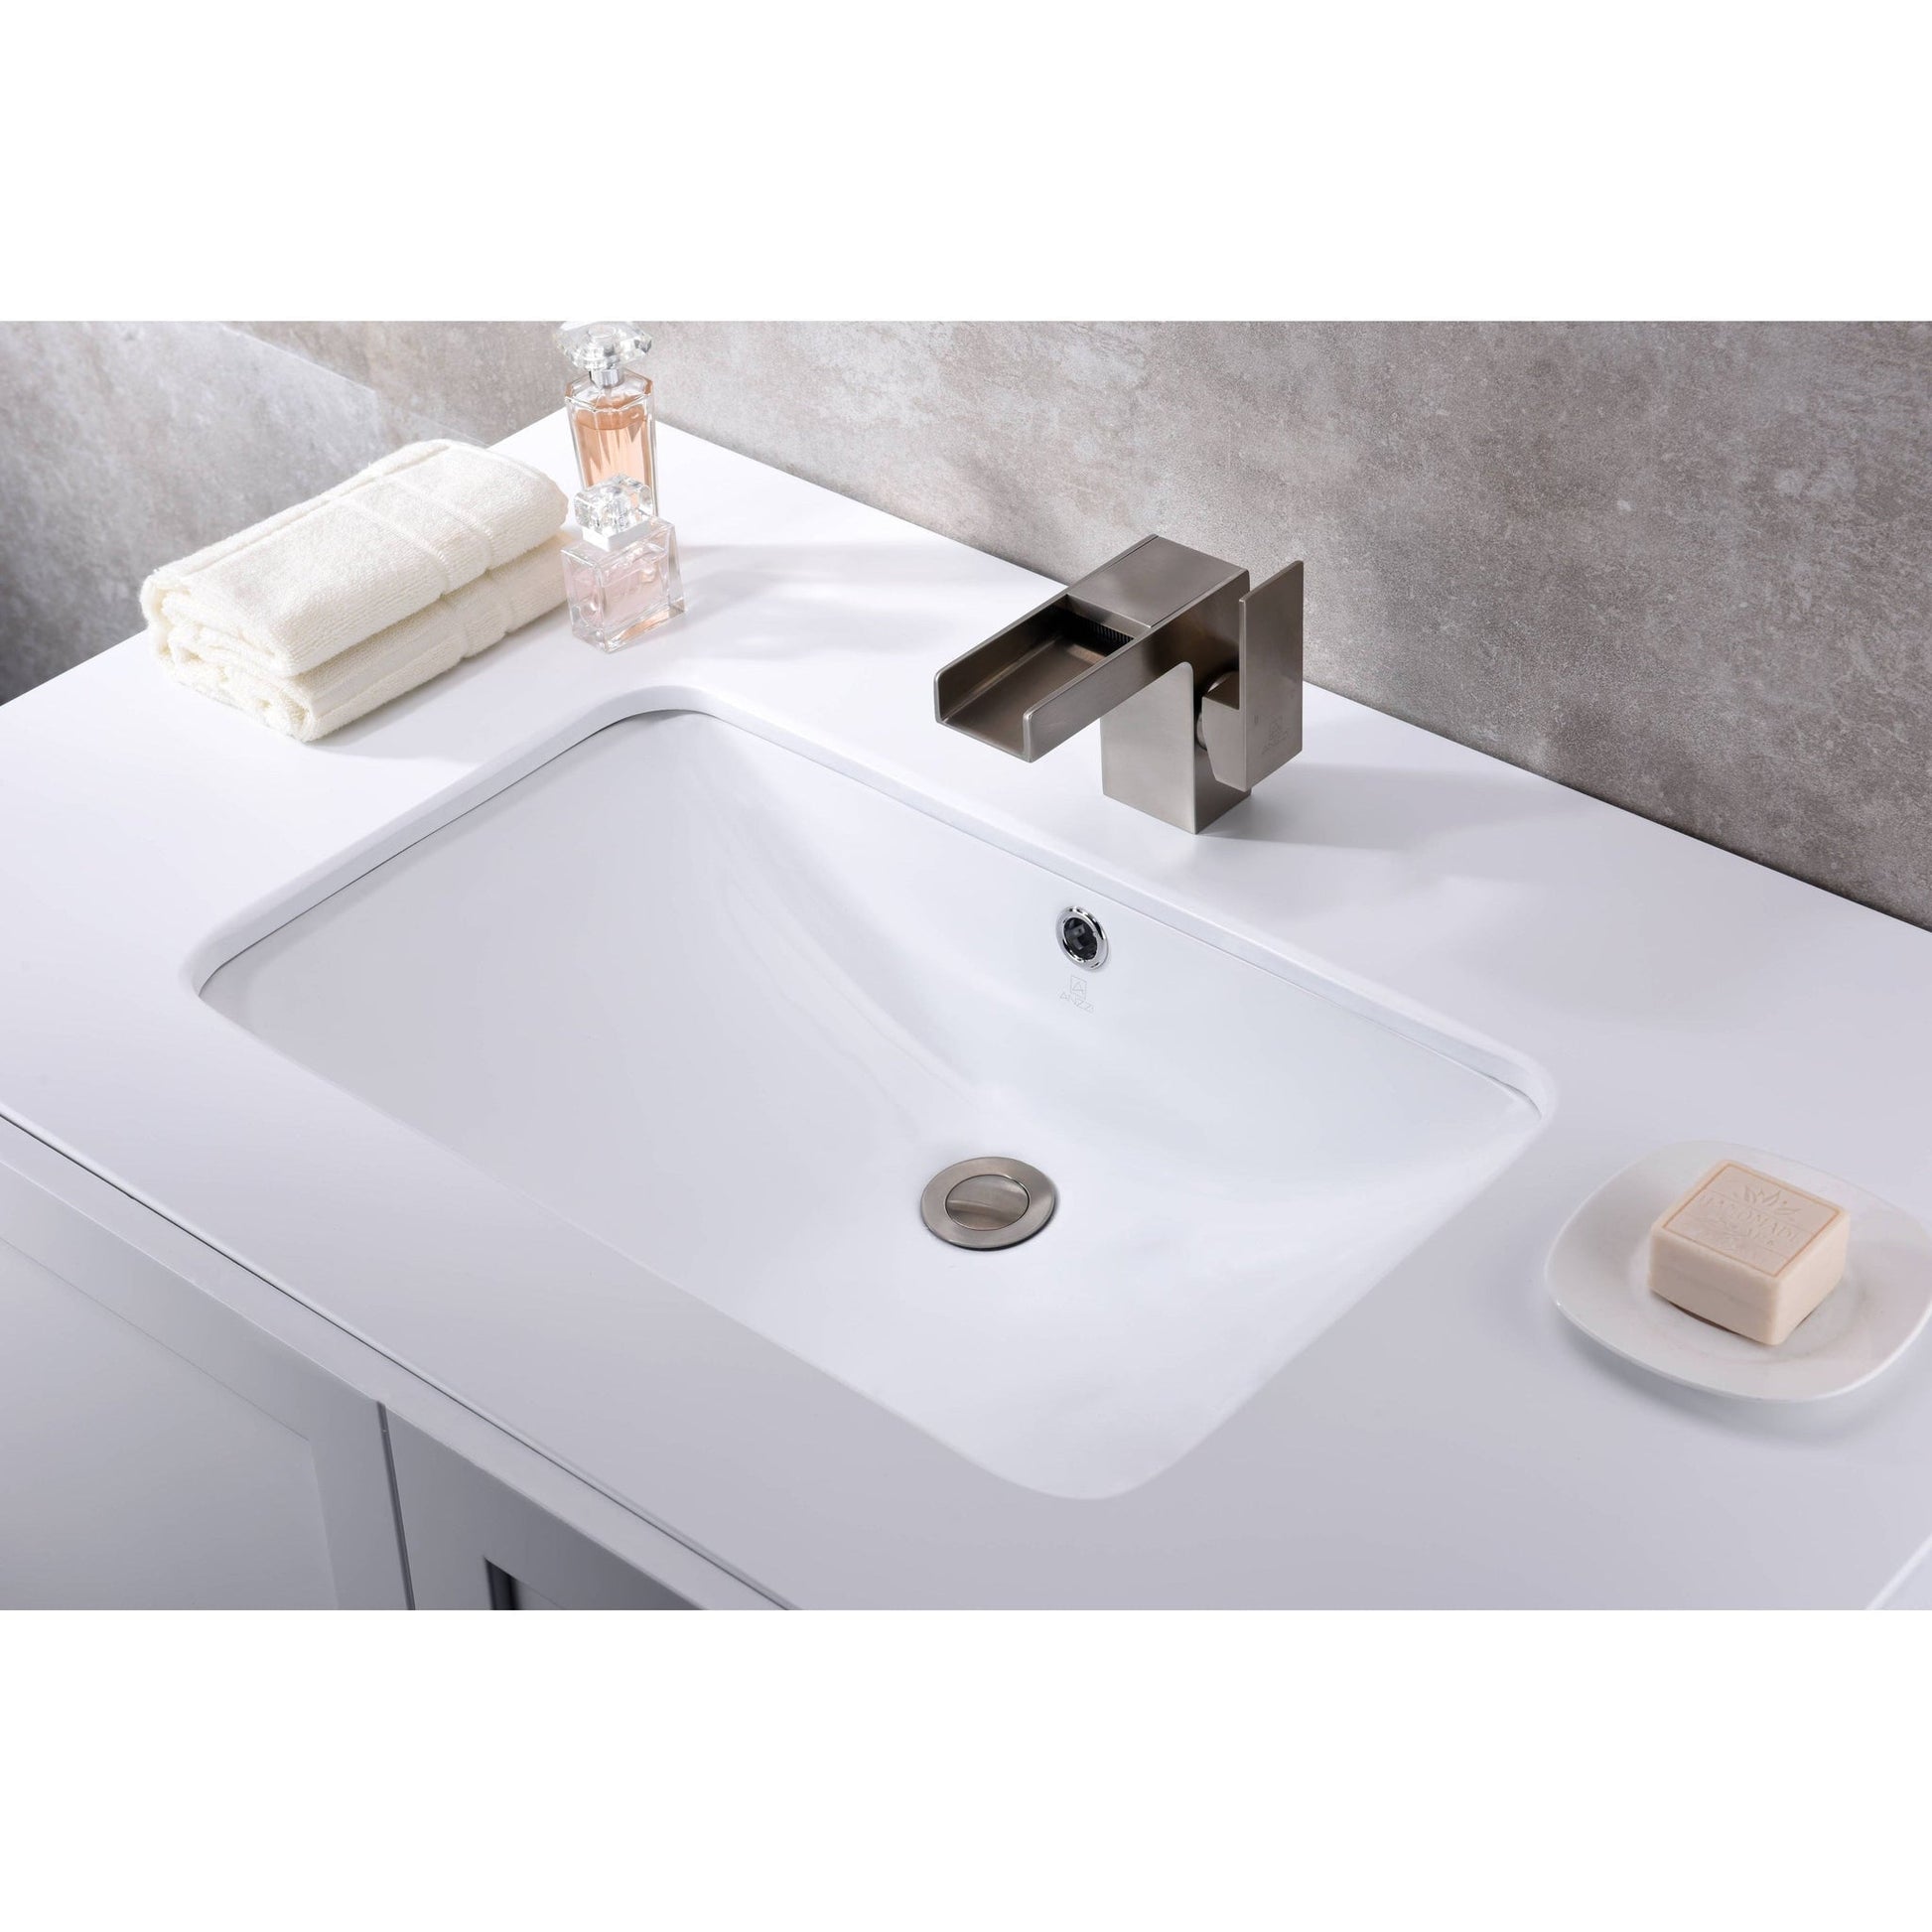 ANZZI Lanmia Series 24" x 15" Rectangular Undermount Sink With Built-In Overflow in Glossy White Finish